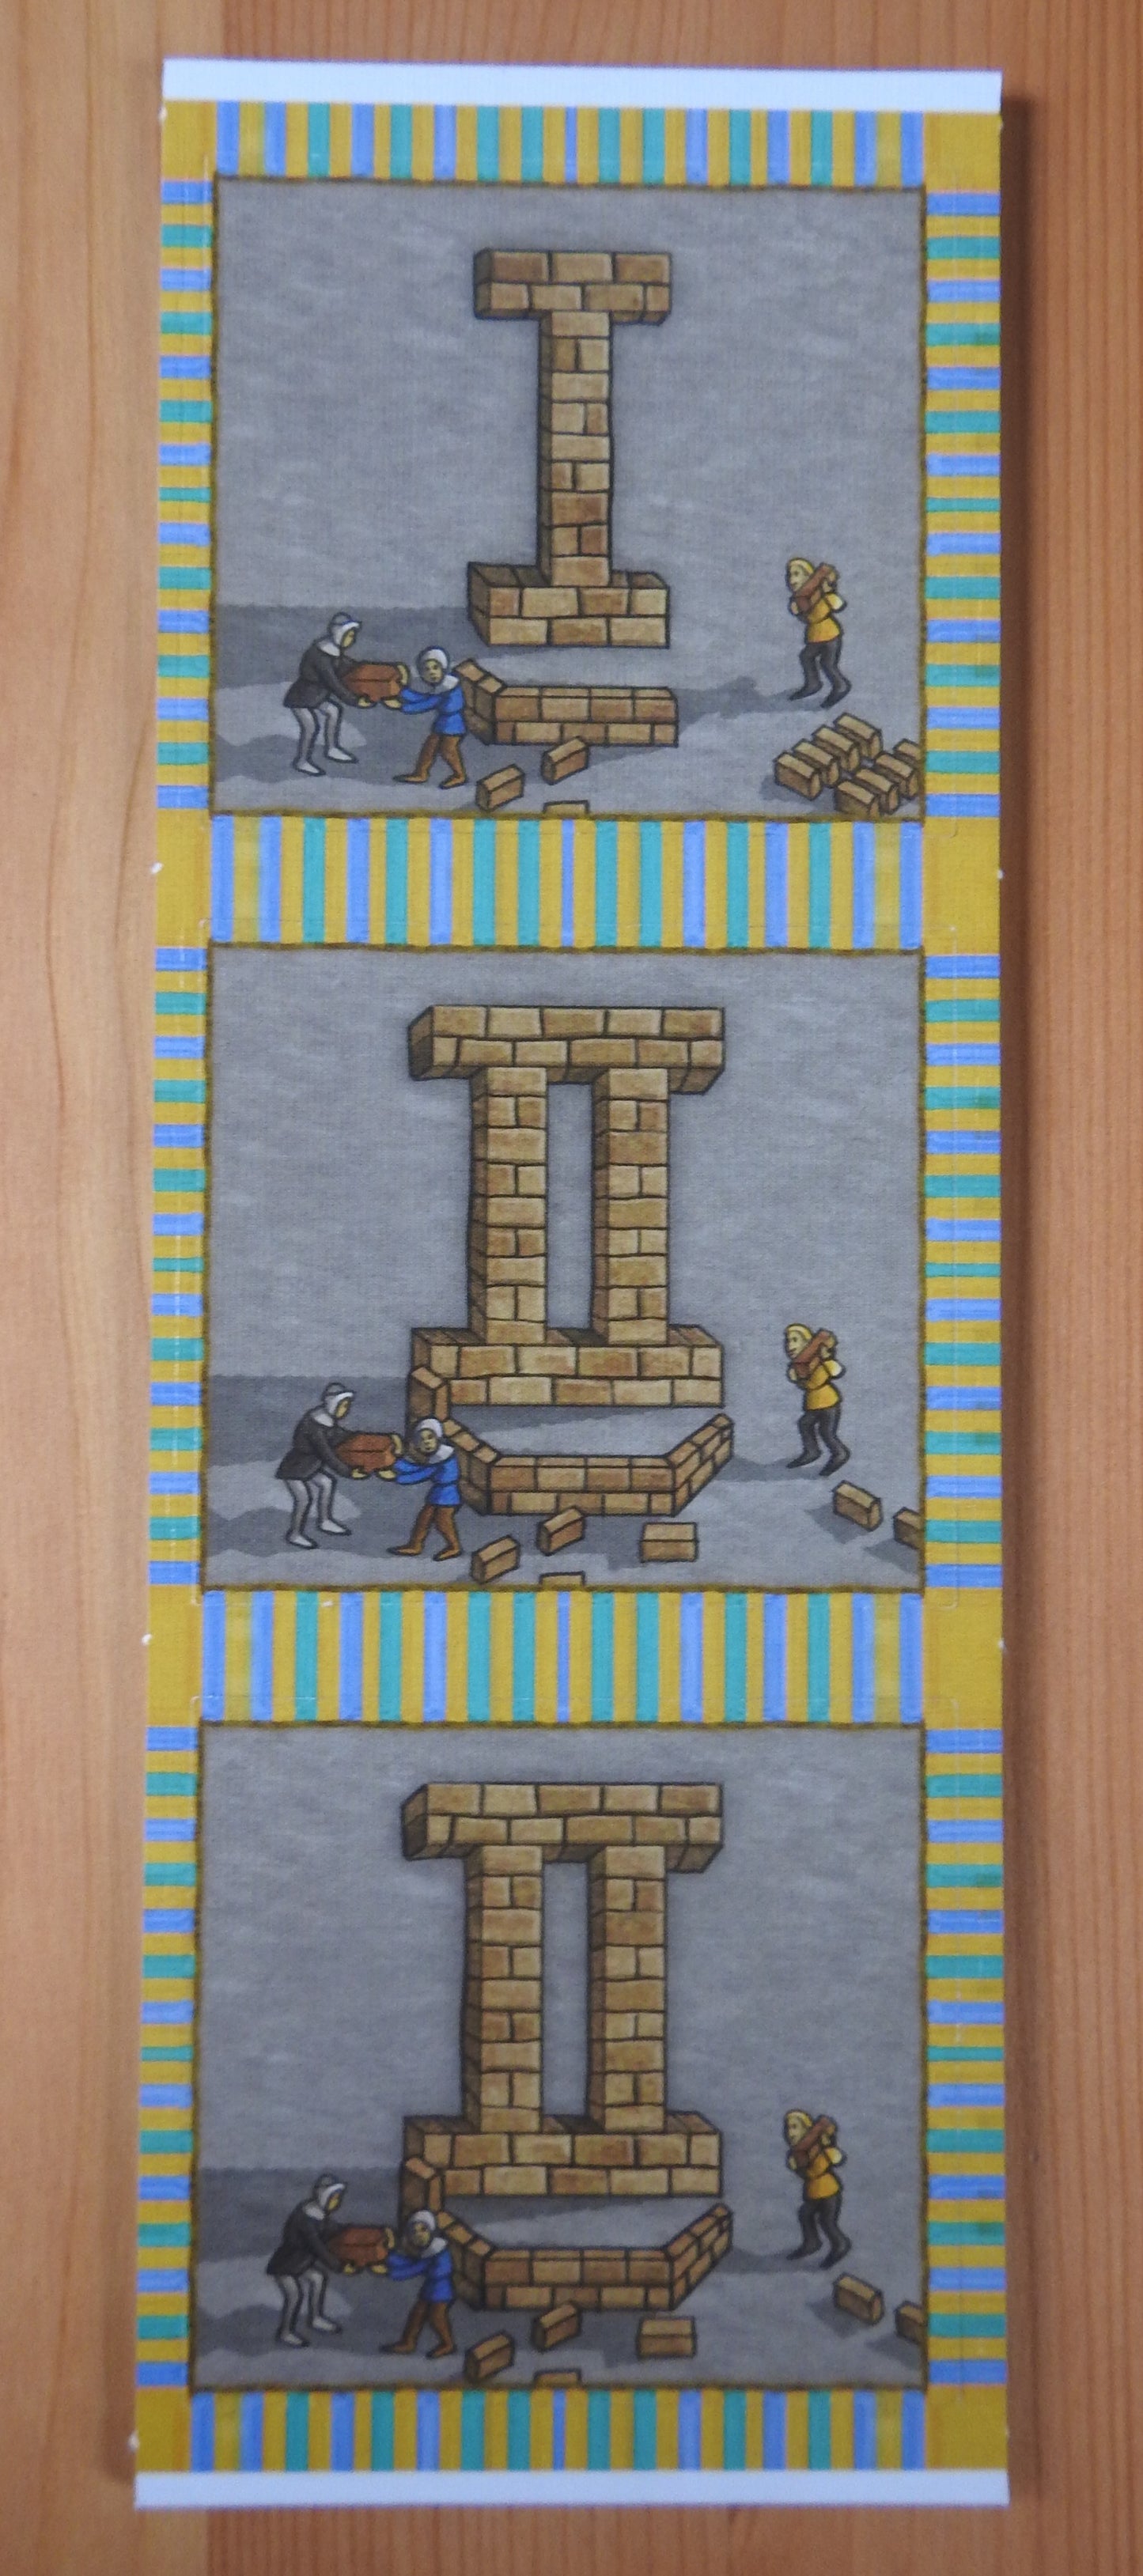 View of the back of the 3 new place tiles.